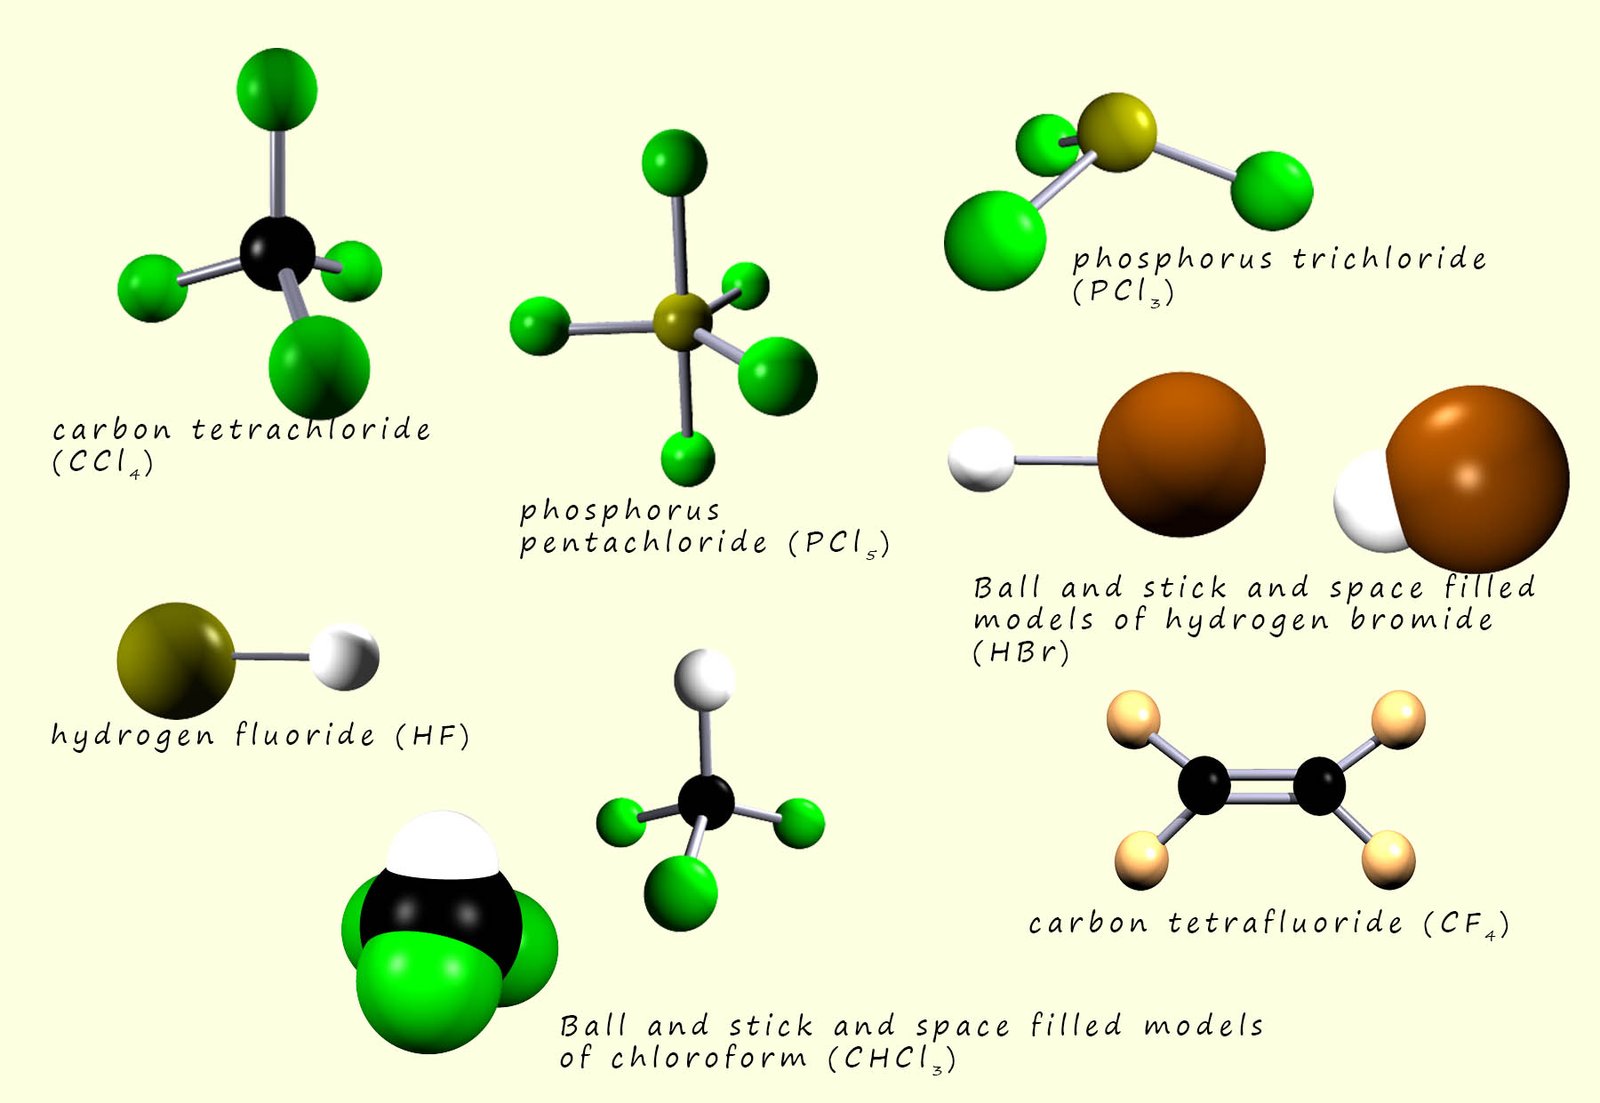 Halogen compounds which consist of only non-metals all have a simple molecular structure.